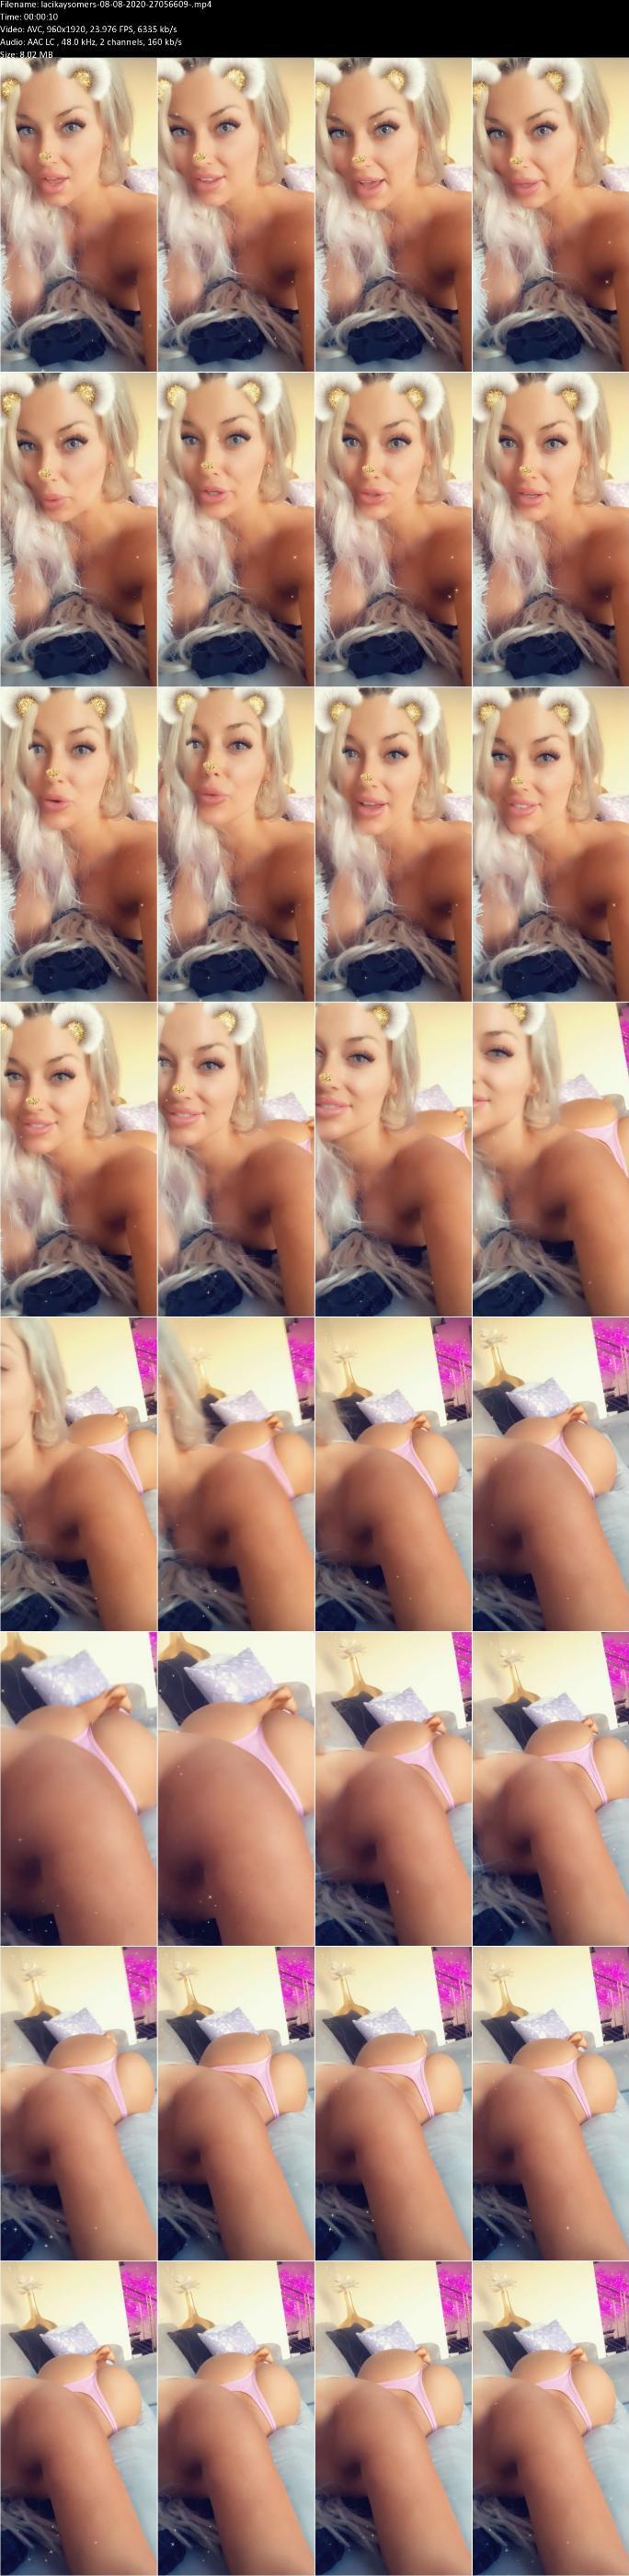 Laci kay somers private